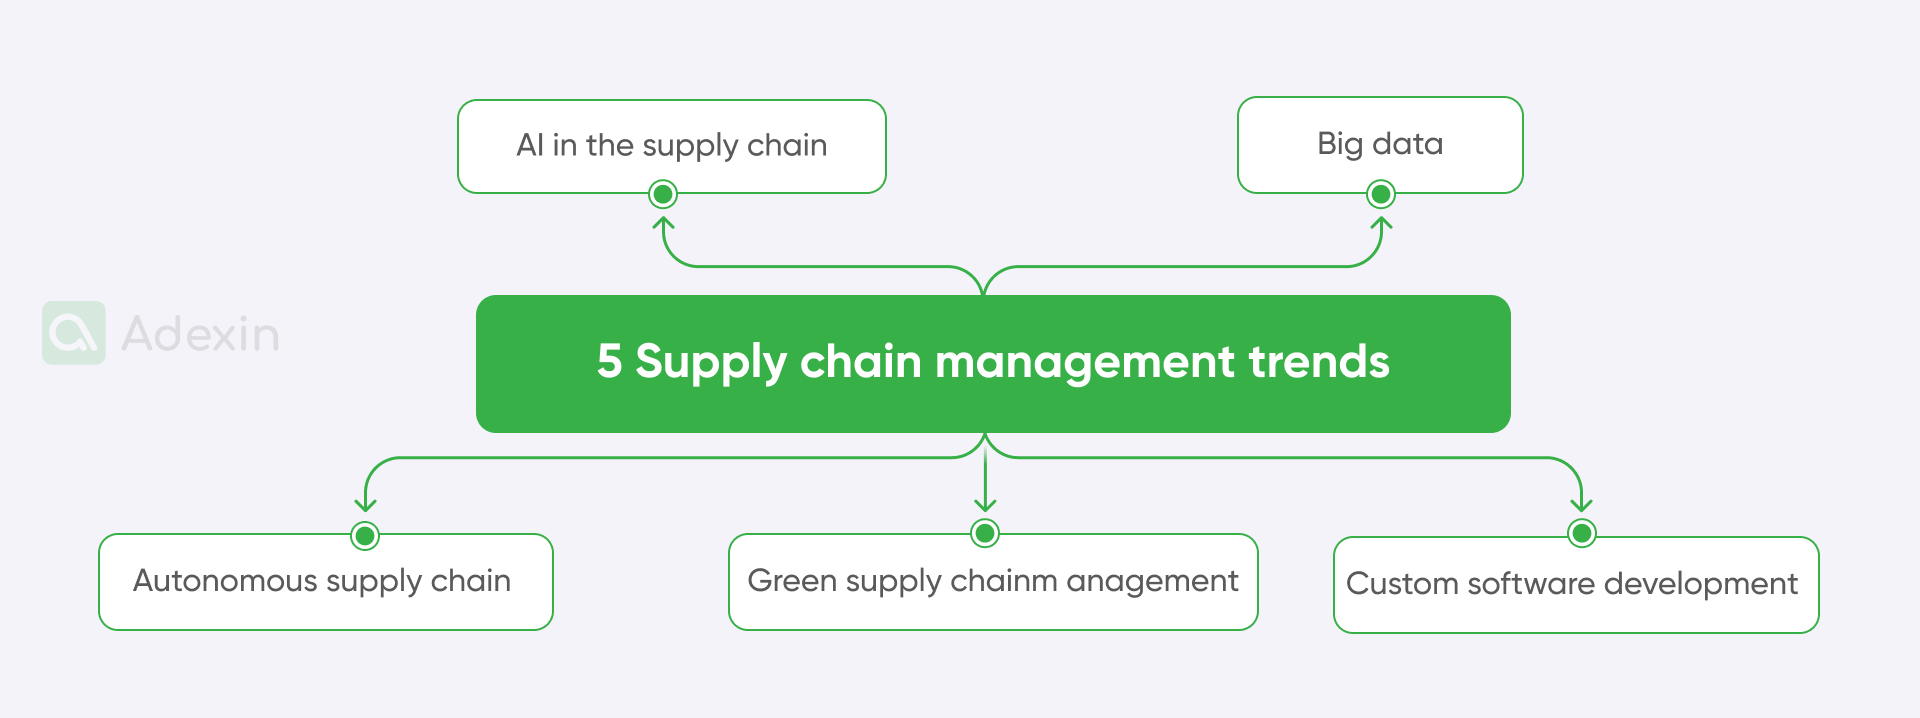 Supply chain management trends